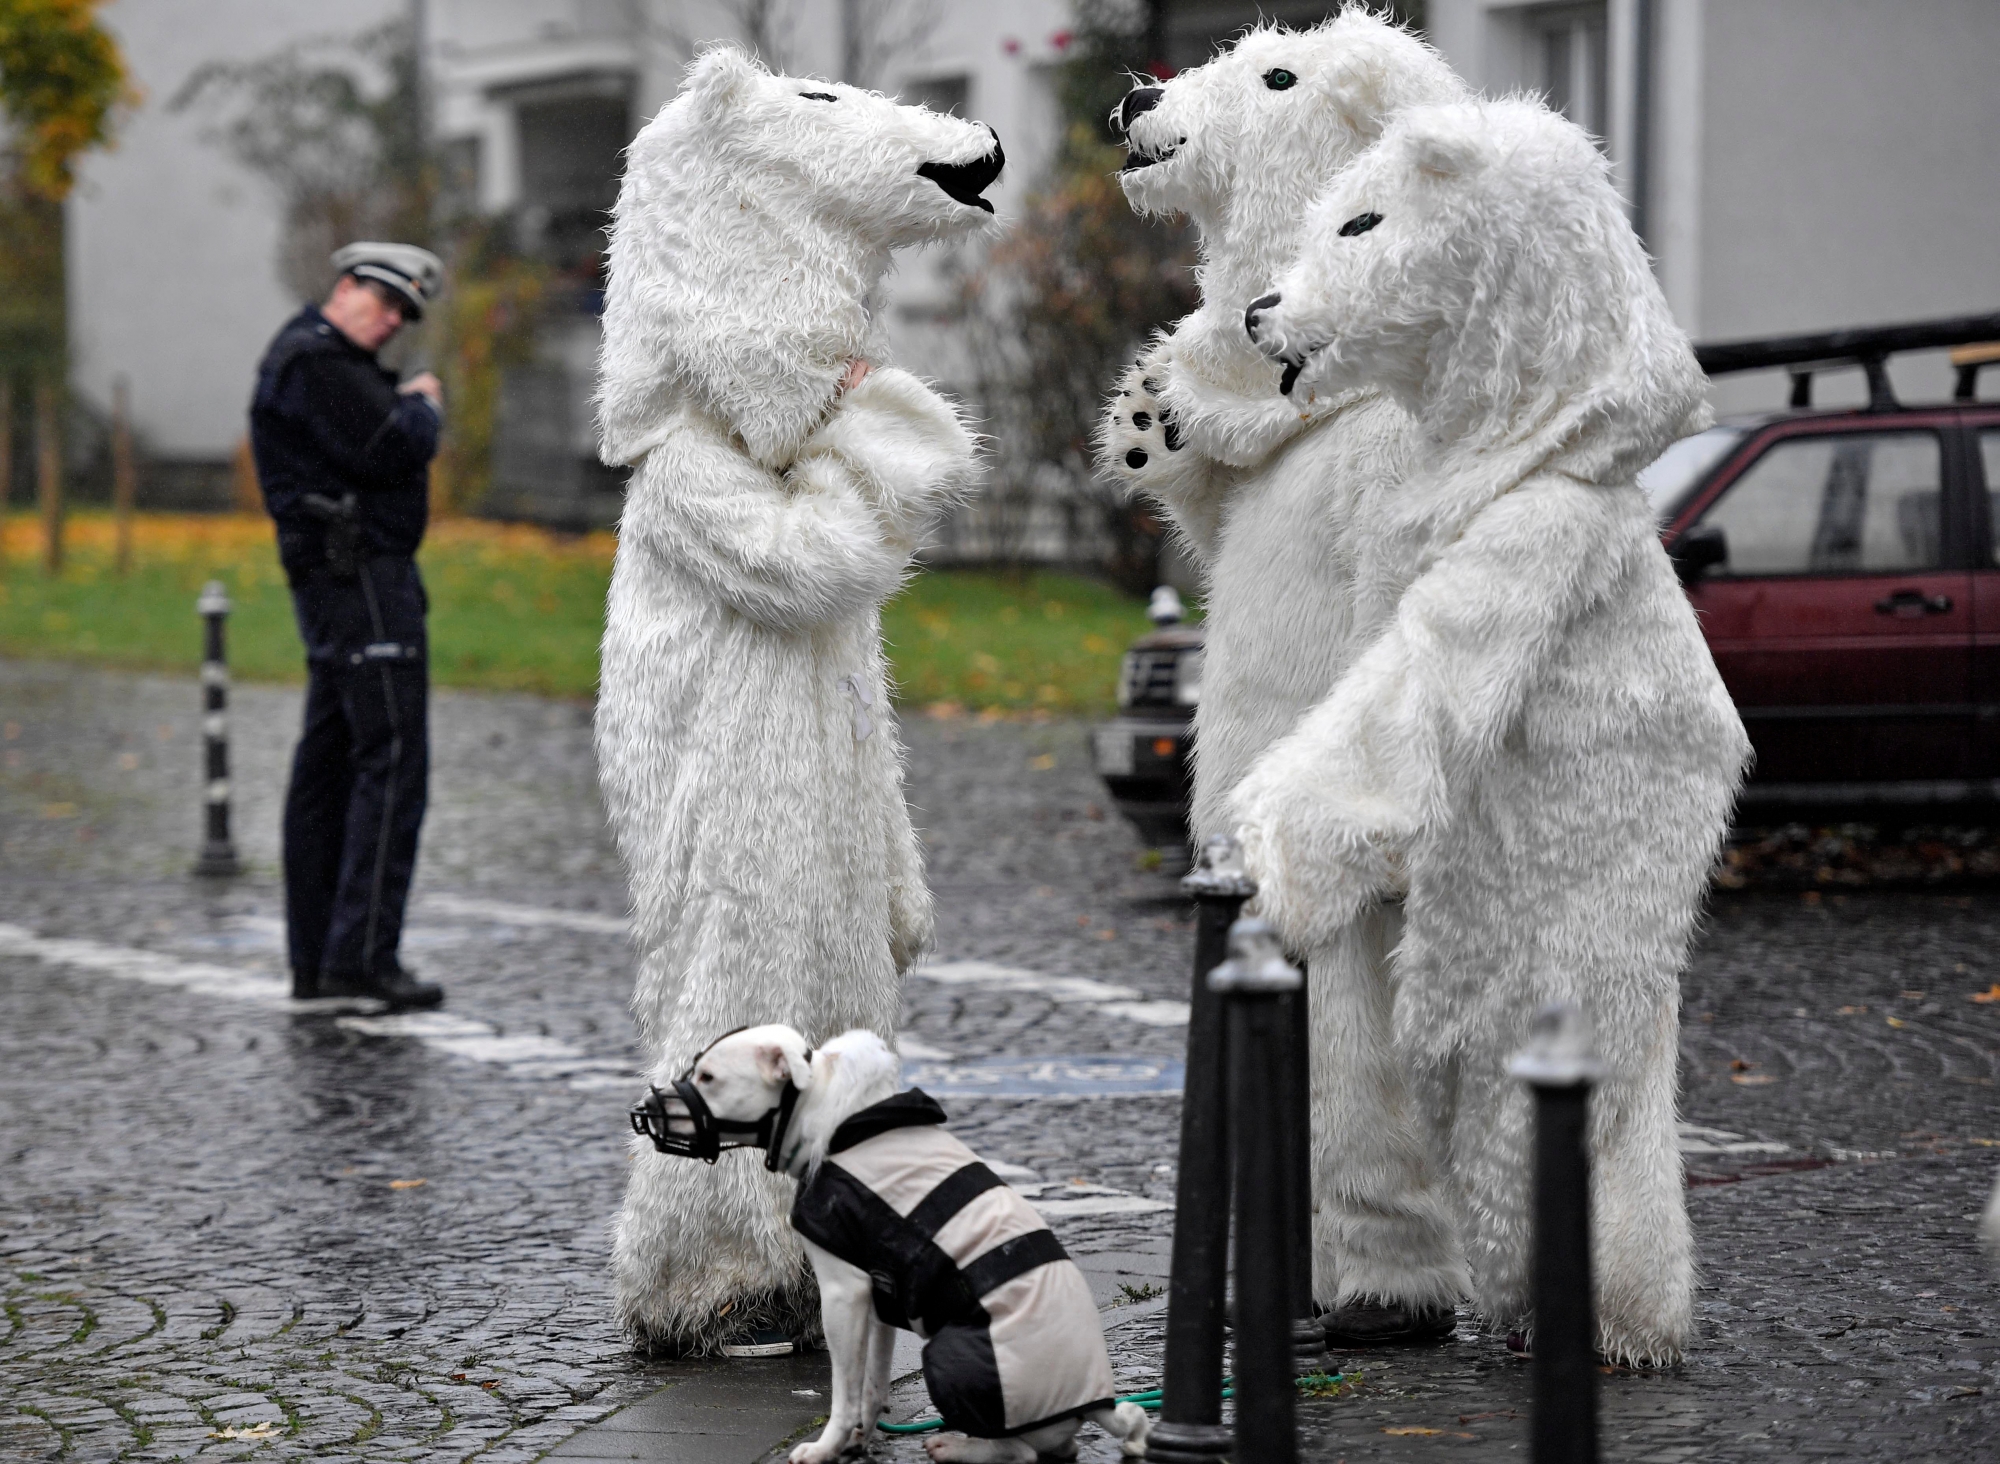 Protestors dressed as polar bears are watched by a police officer as they talk in a backstreet after a demonstration outside the COP 23 Fiji UN Climate Change Conference in Bonn, Germany, Saturday, Nov. 11, 2017. (AP Photo/Martin Meissner) APTOPIX Germany Climate Conference